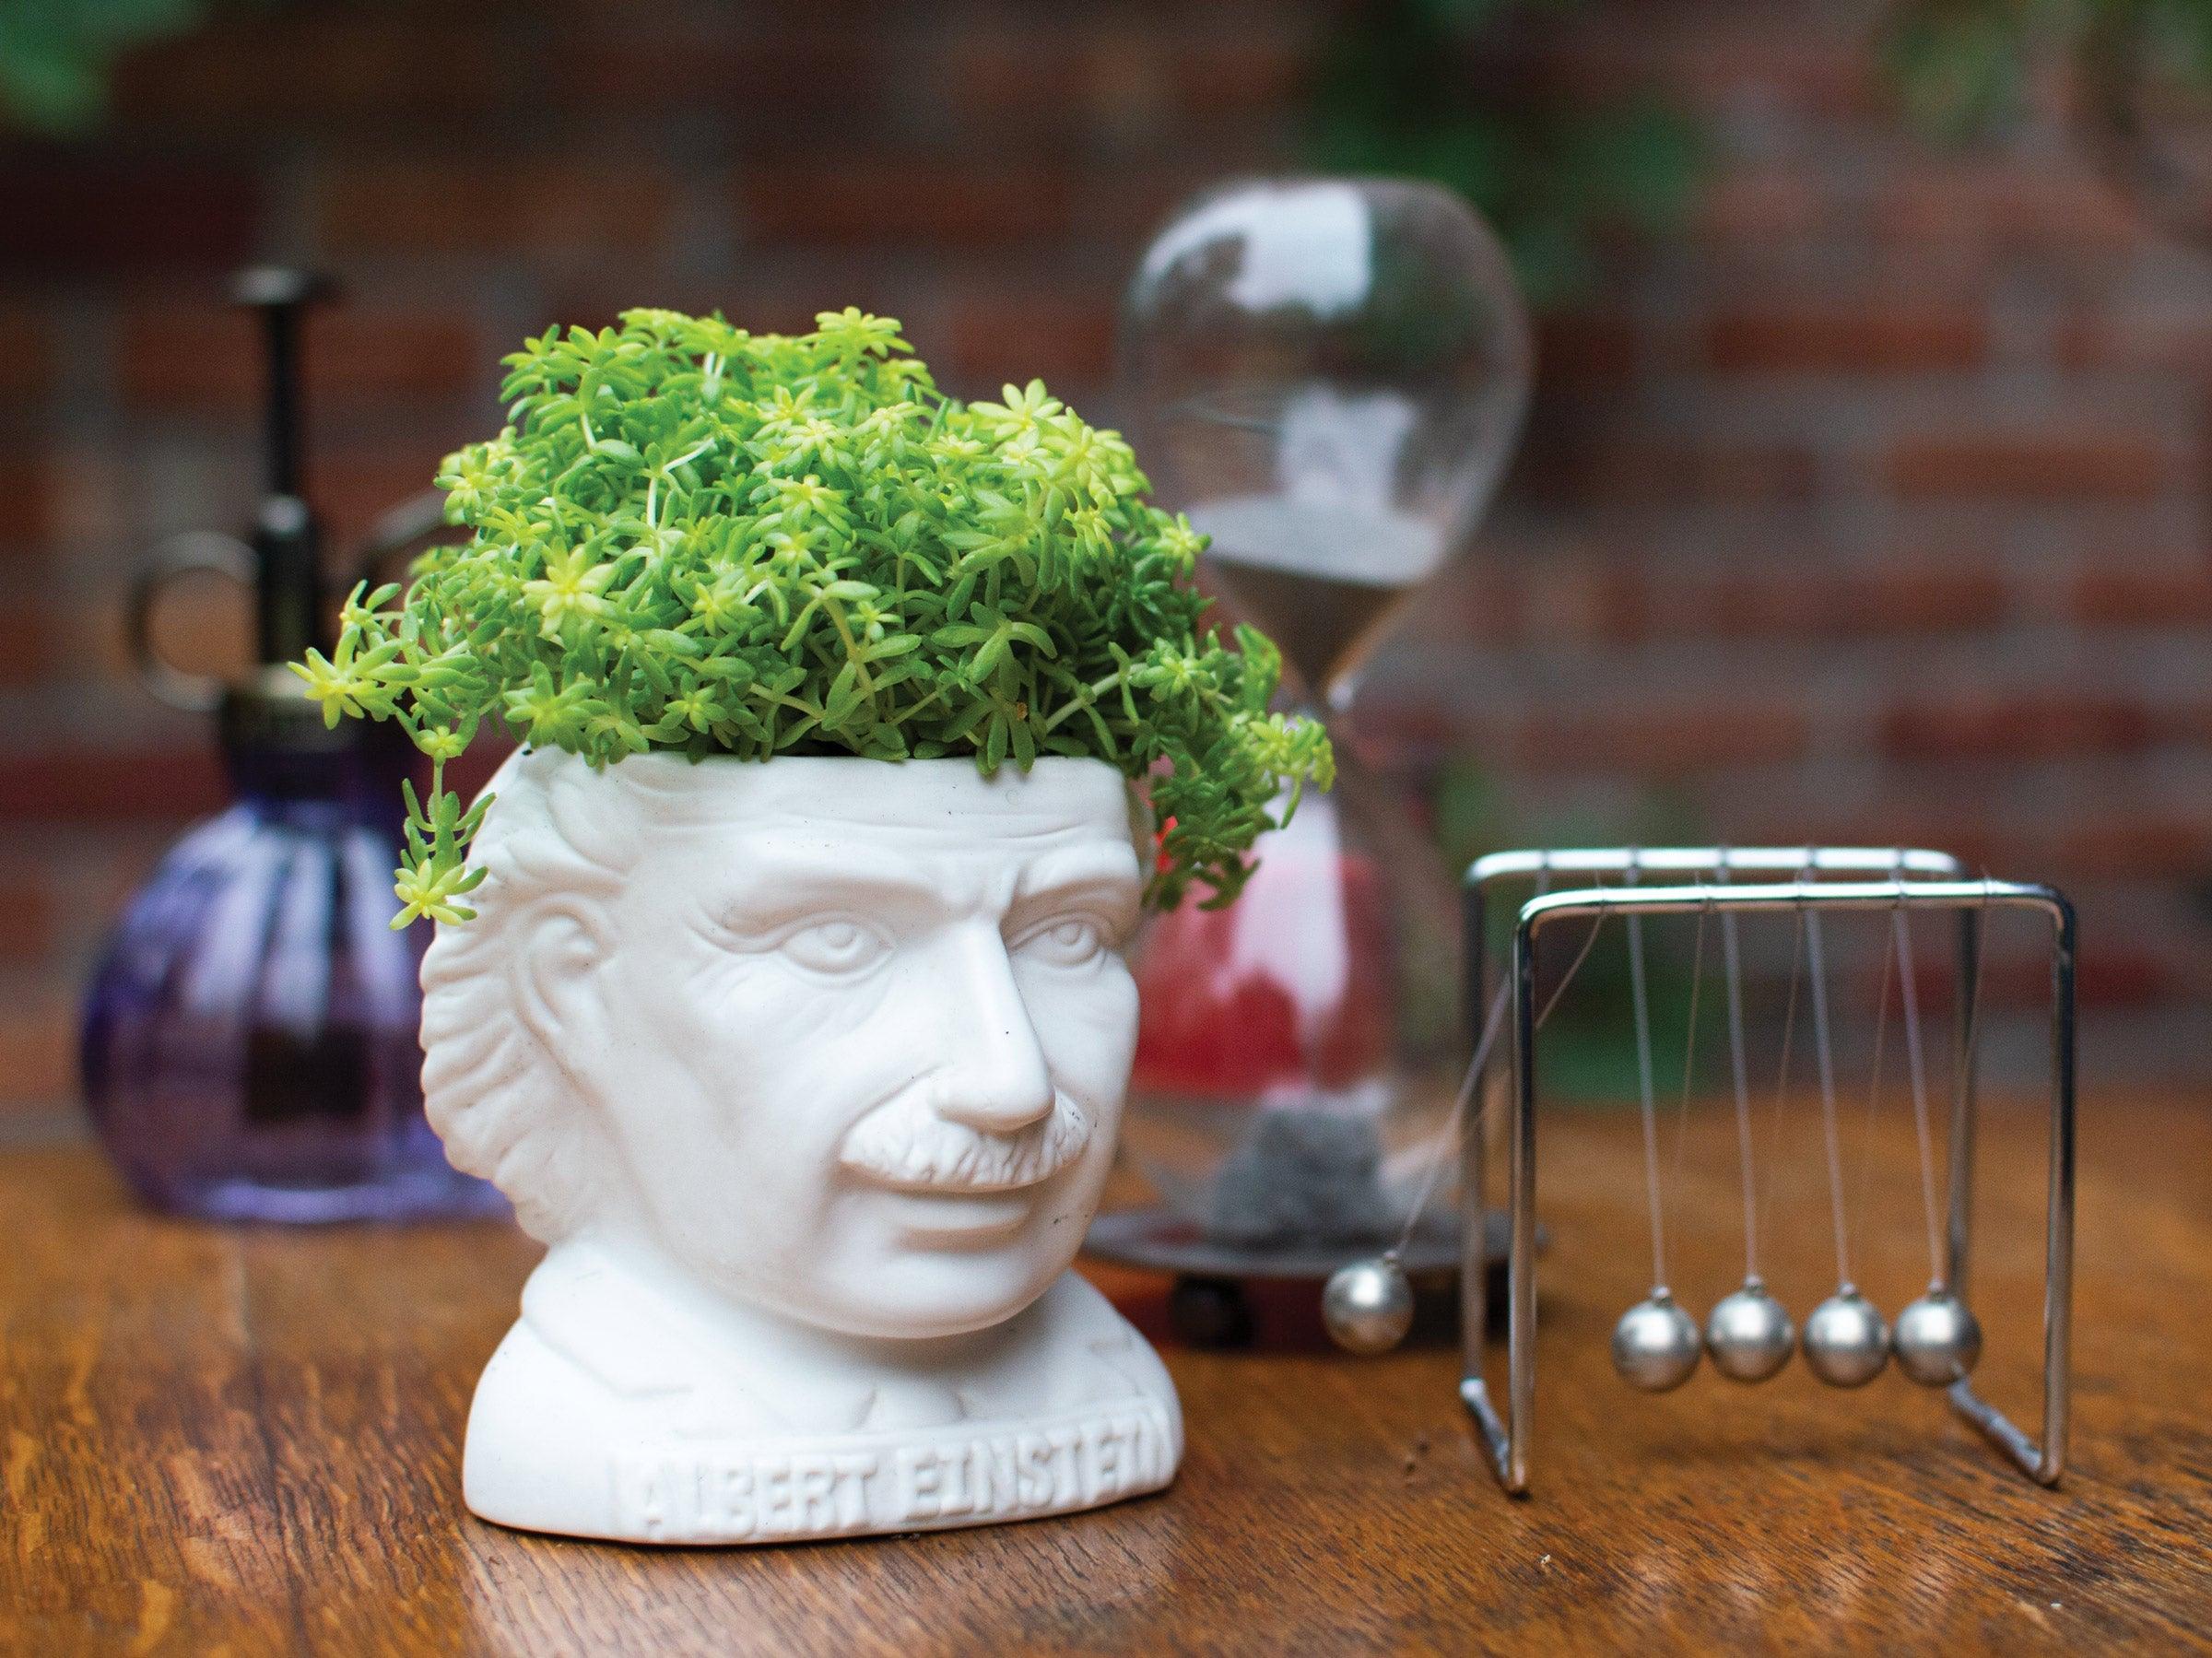 Product photo of Albert Einstein Bust Planter, a novelty gift manufactured by The Unemployed Philosophers Guild.